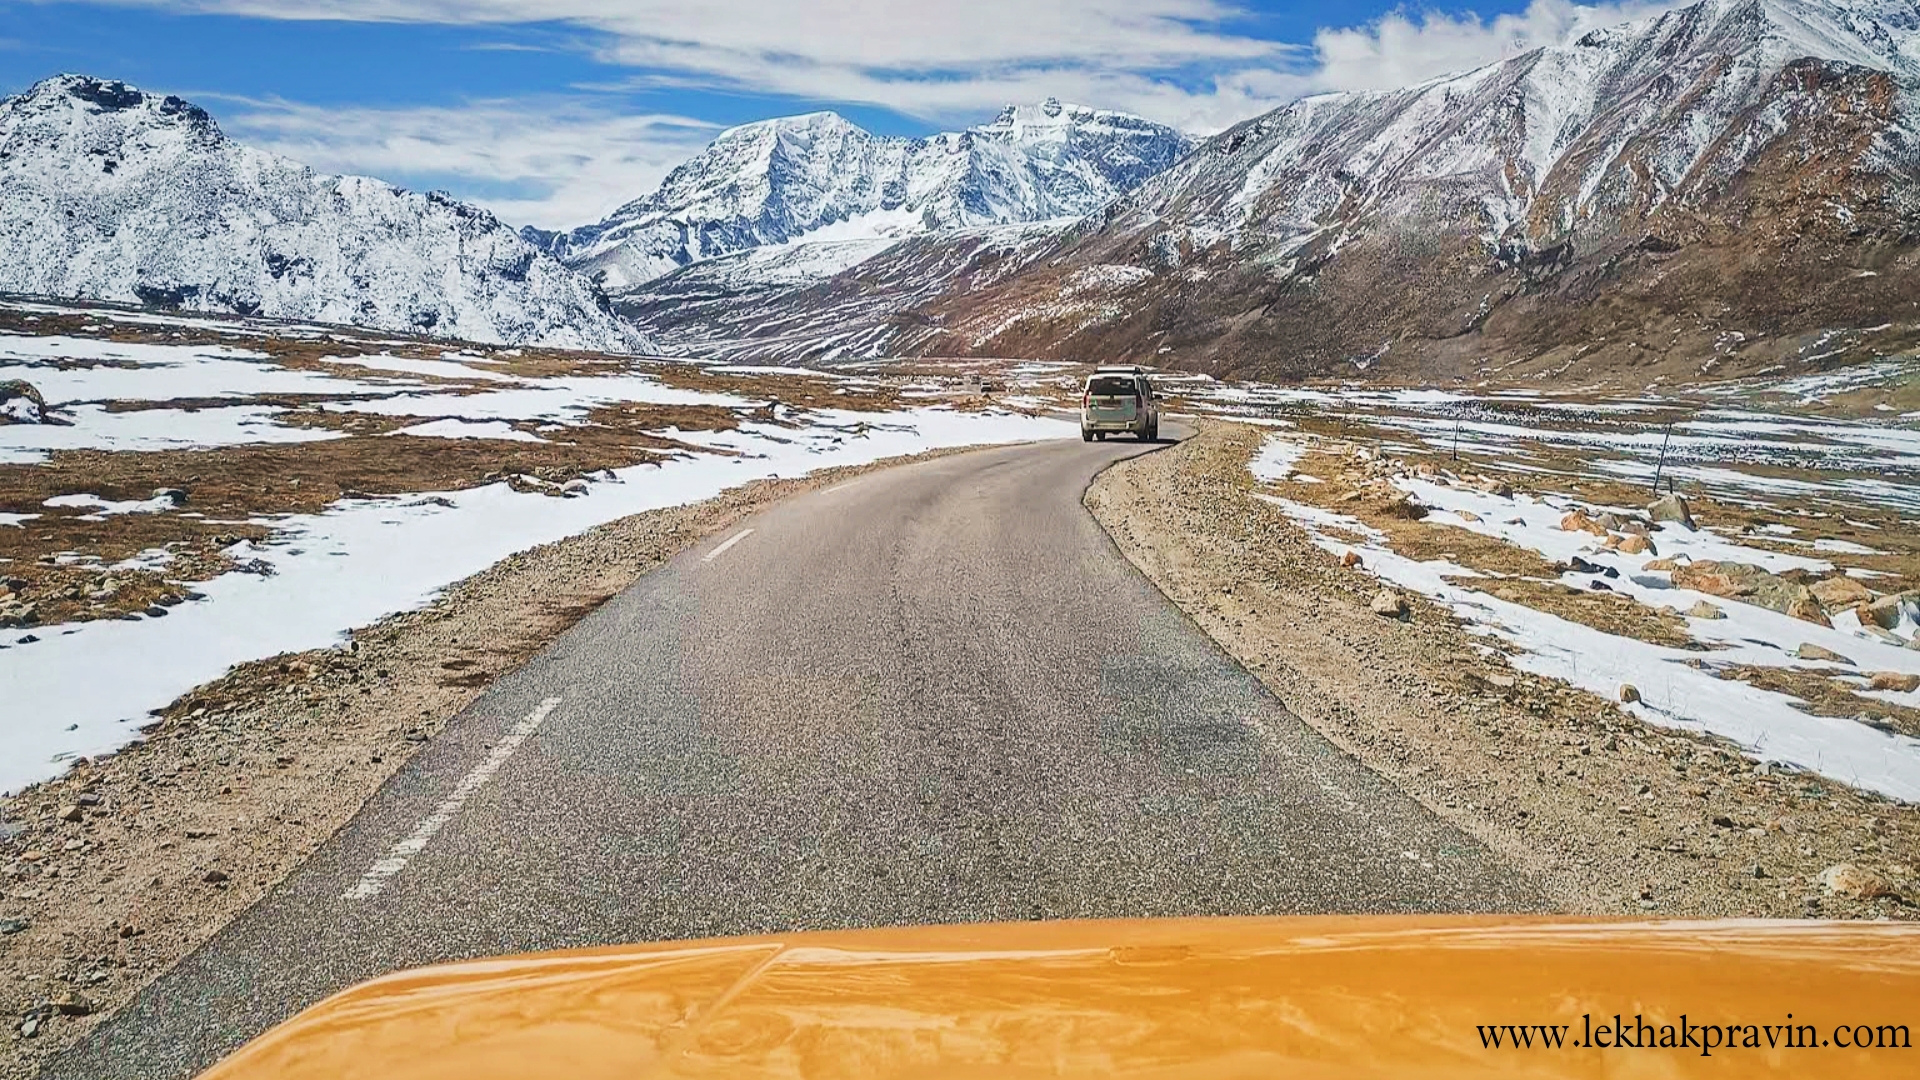 best time for traveling to Umling La pass
Umling La Pass height in feet
umlingla pass height in feet
world highest motorable road in india
umlingla pass location
leh to umling la pass distance
Leh to Umling La Pass
world's highest motorable road